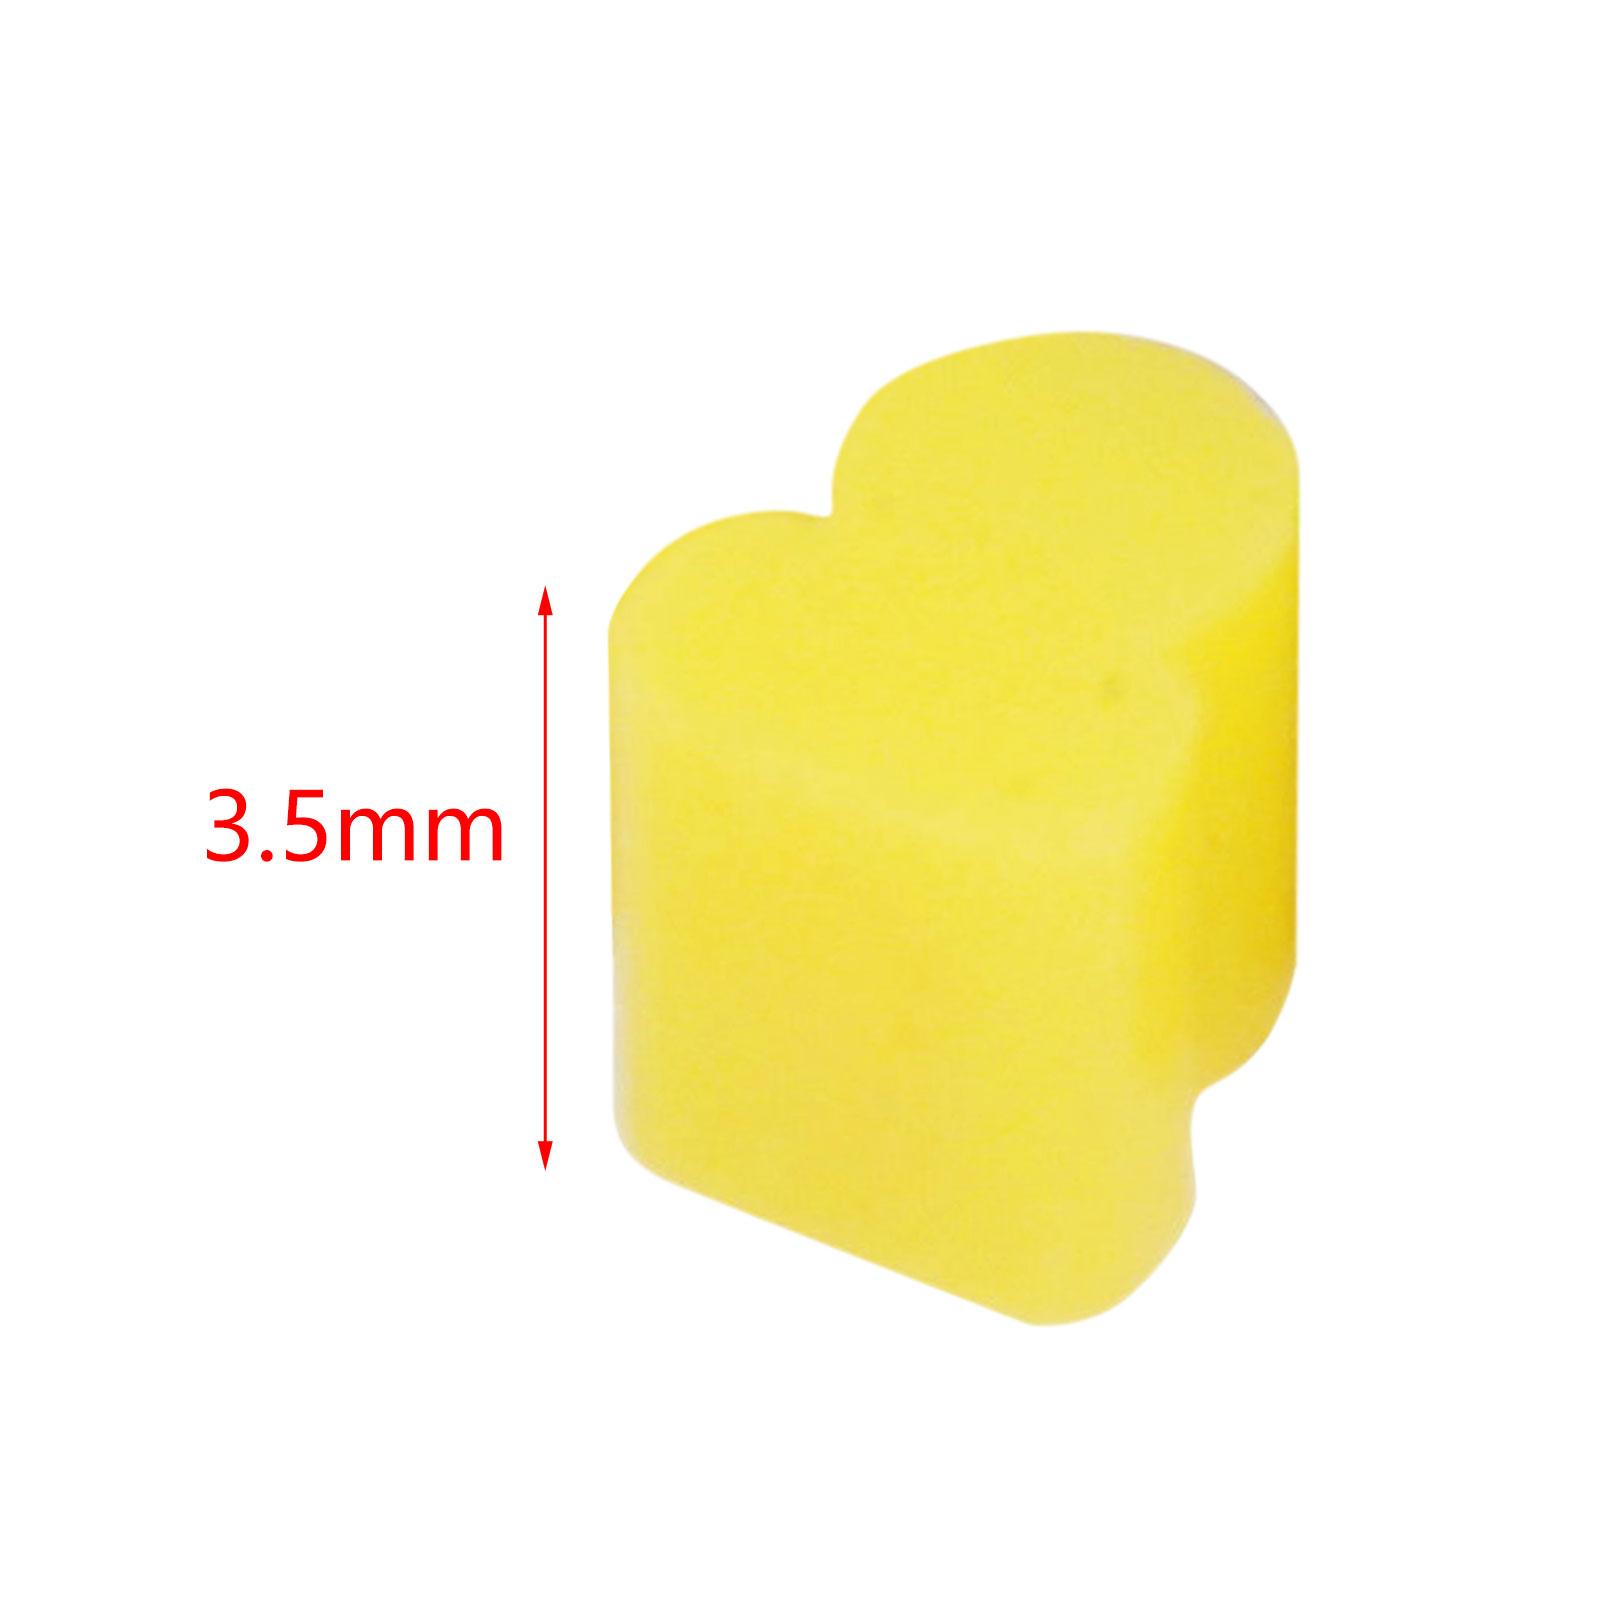 10x Alto Horns Silicone Pads Buffering Stop for Brass Euphonium Tuba Trumpet 3.5mm Yellow